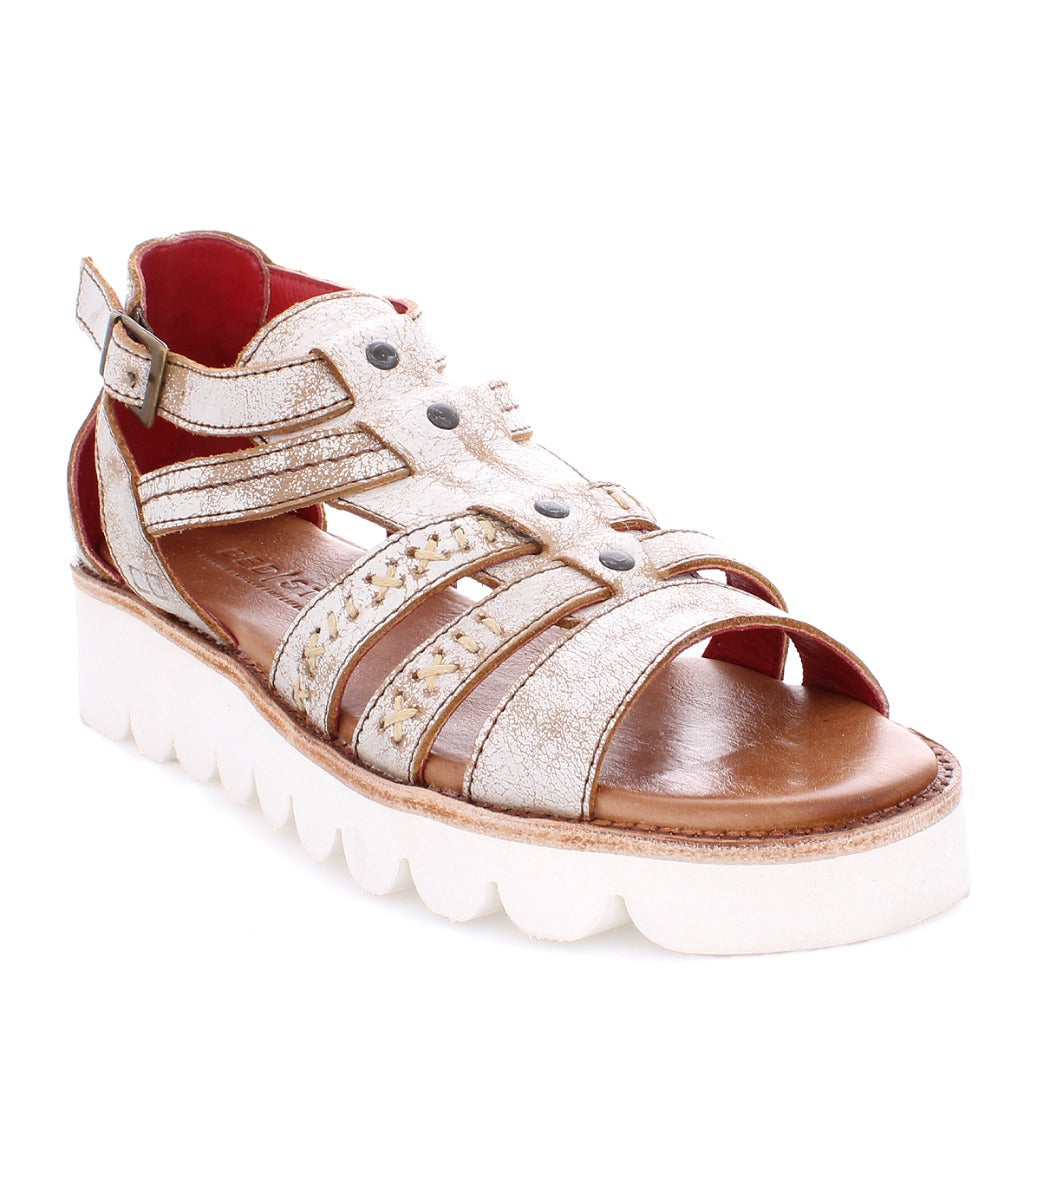 A women's Bed Stu Wonder sandal with straps and a white sole.